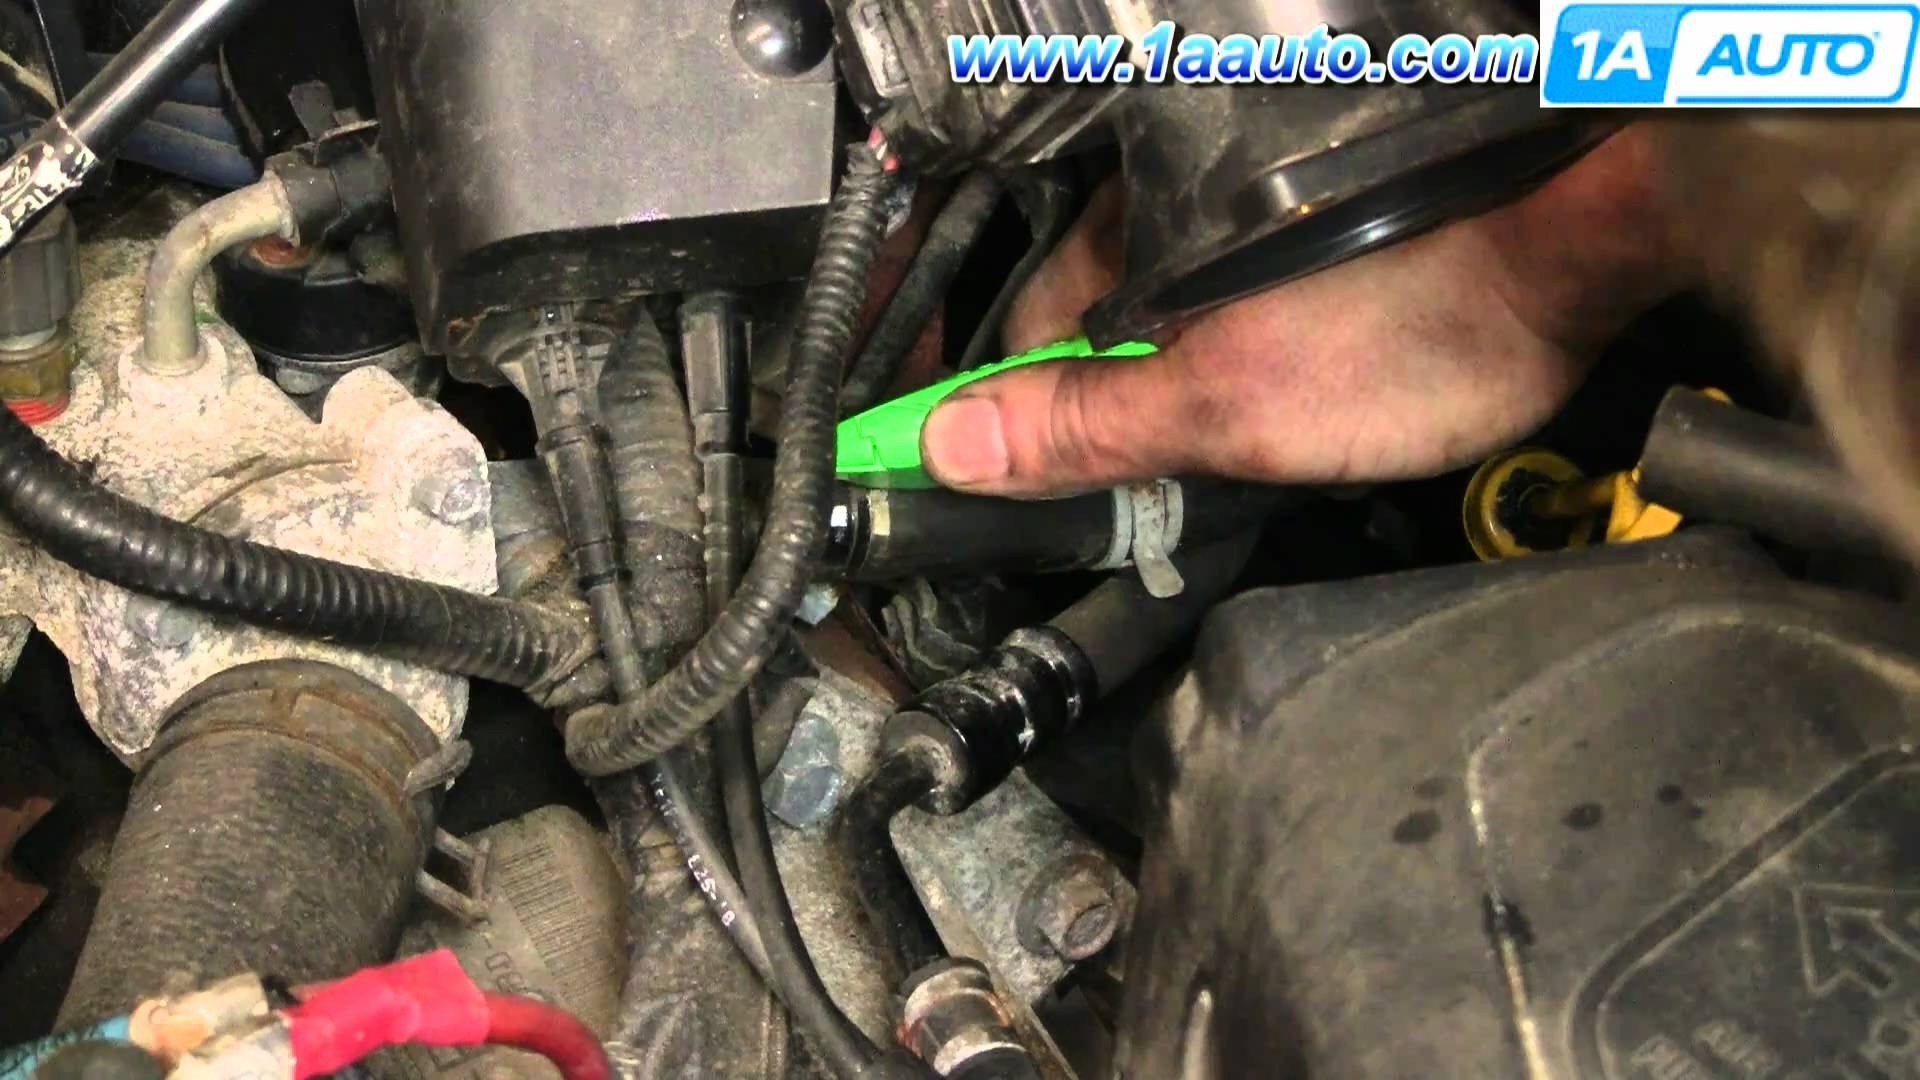 2003 ford Taurus Engine Hose Diagram How to Install Replace Heater Hose assembly Tube ford Taurus Mercury